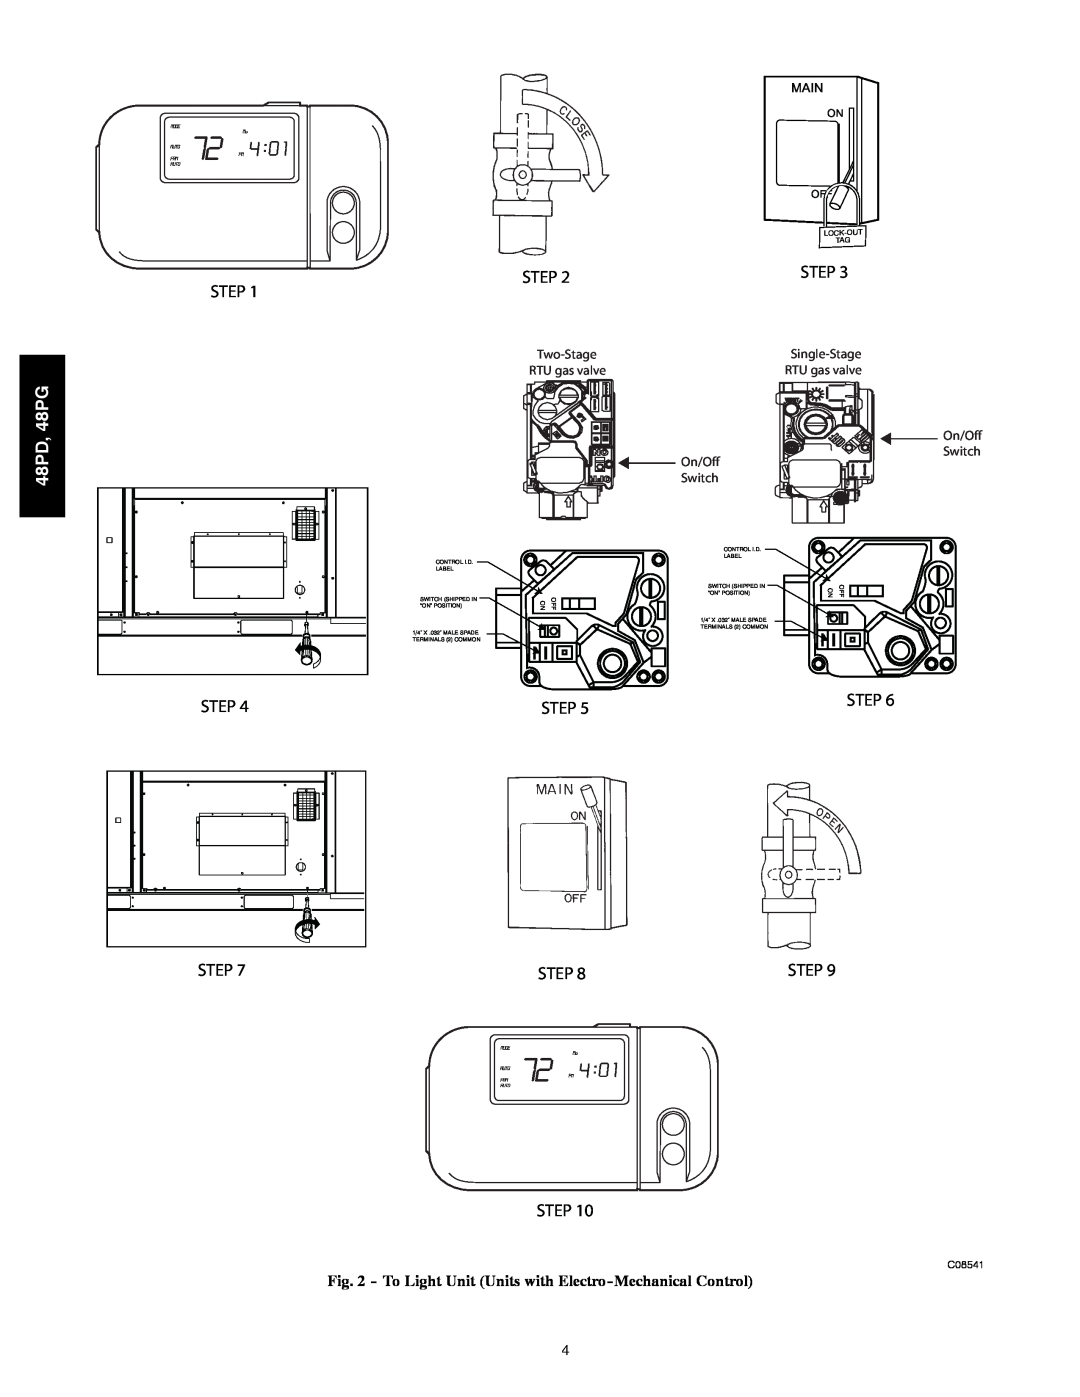 Carrier 48PD05, 06 48PD, 48PG, Step Step, Two-Stage RTU gas valve, Main, Single-Stage RTU gas valve On/Off Switch, On Off 